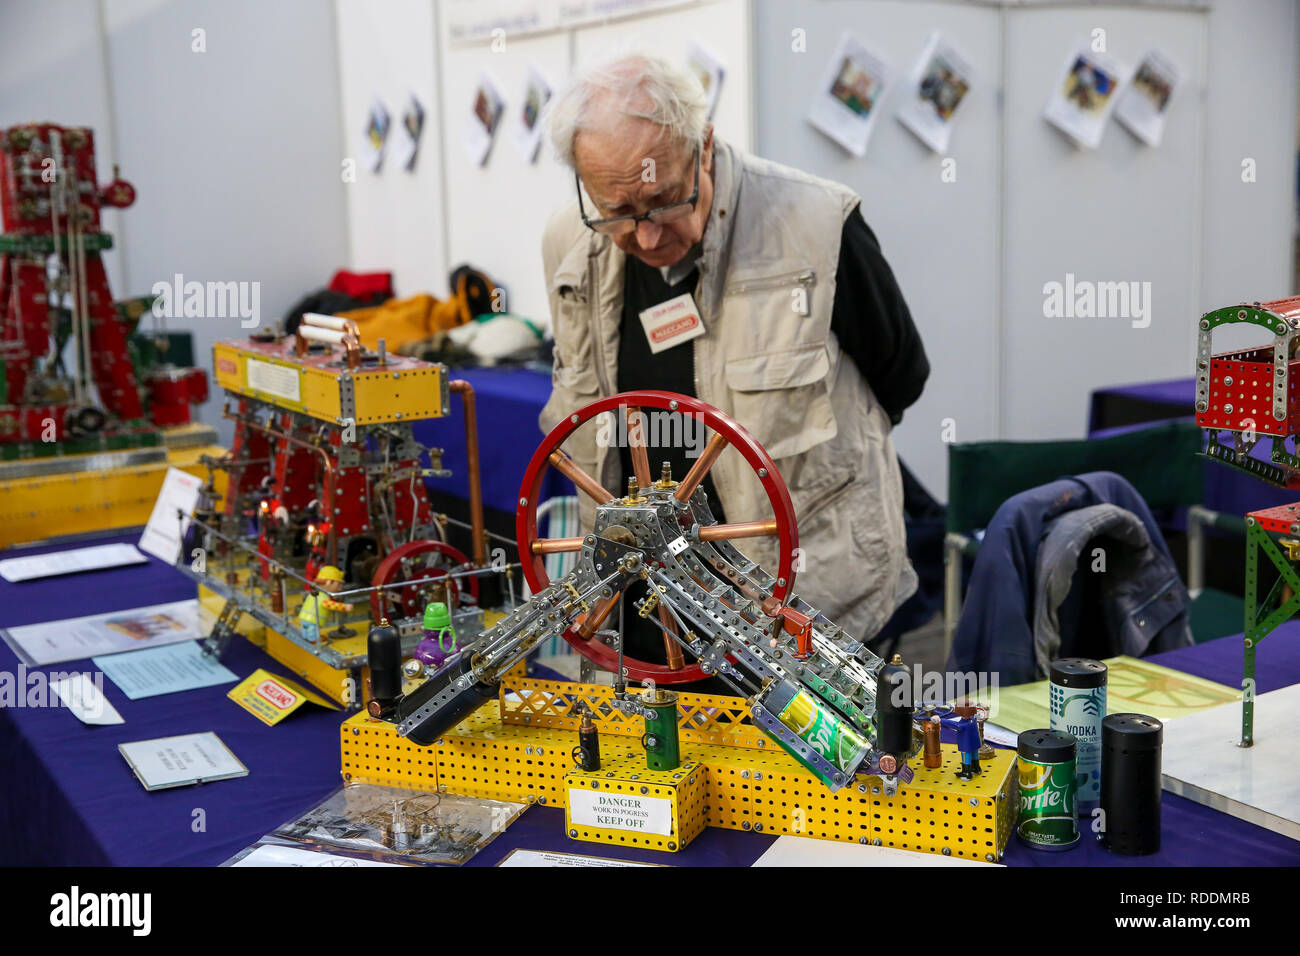 London, UK. 18th Jan, 2019. A man is seen viewing a Meccano set at the annual London Model Engineering Exhibition at Alexandra Palace, north London. Over 50 clubs and societies are exhibiting full spectrum of modeling from traditional model engineering, steam locomotives and traction engines through to the more modern gadgets including trucks, boats, aeroplanes and helicoptersÃŠwith nearly 2,000 models constructed by their members. Credit: Dinendra Haria/SOPA Images/ZUMA Wire/Alamy Live News Stock Photo